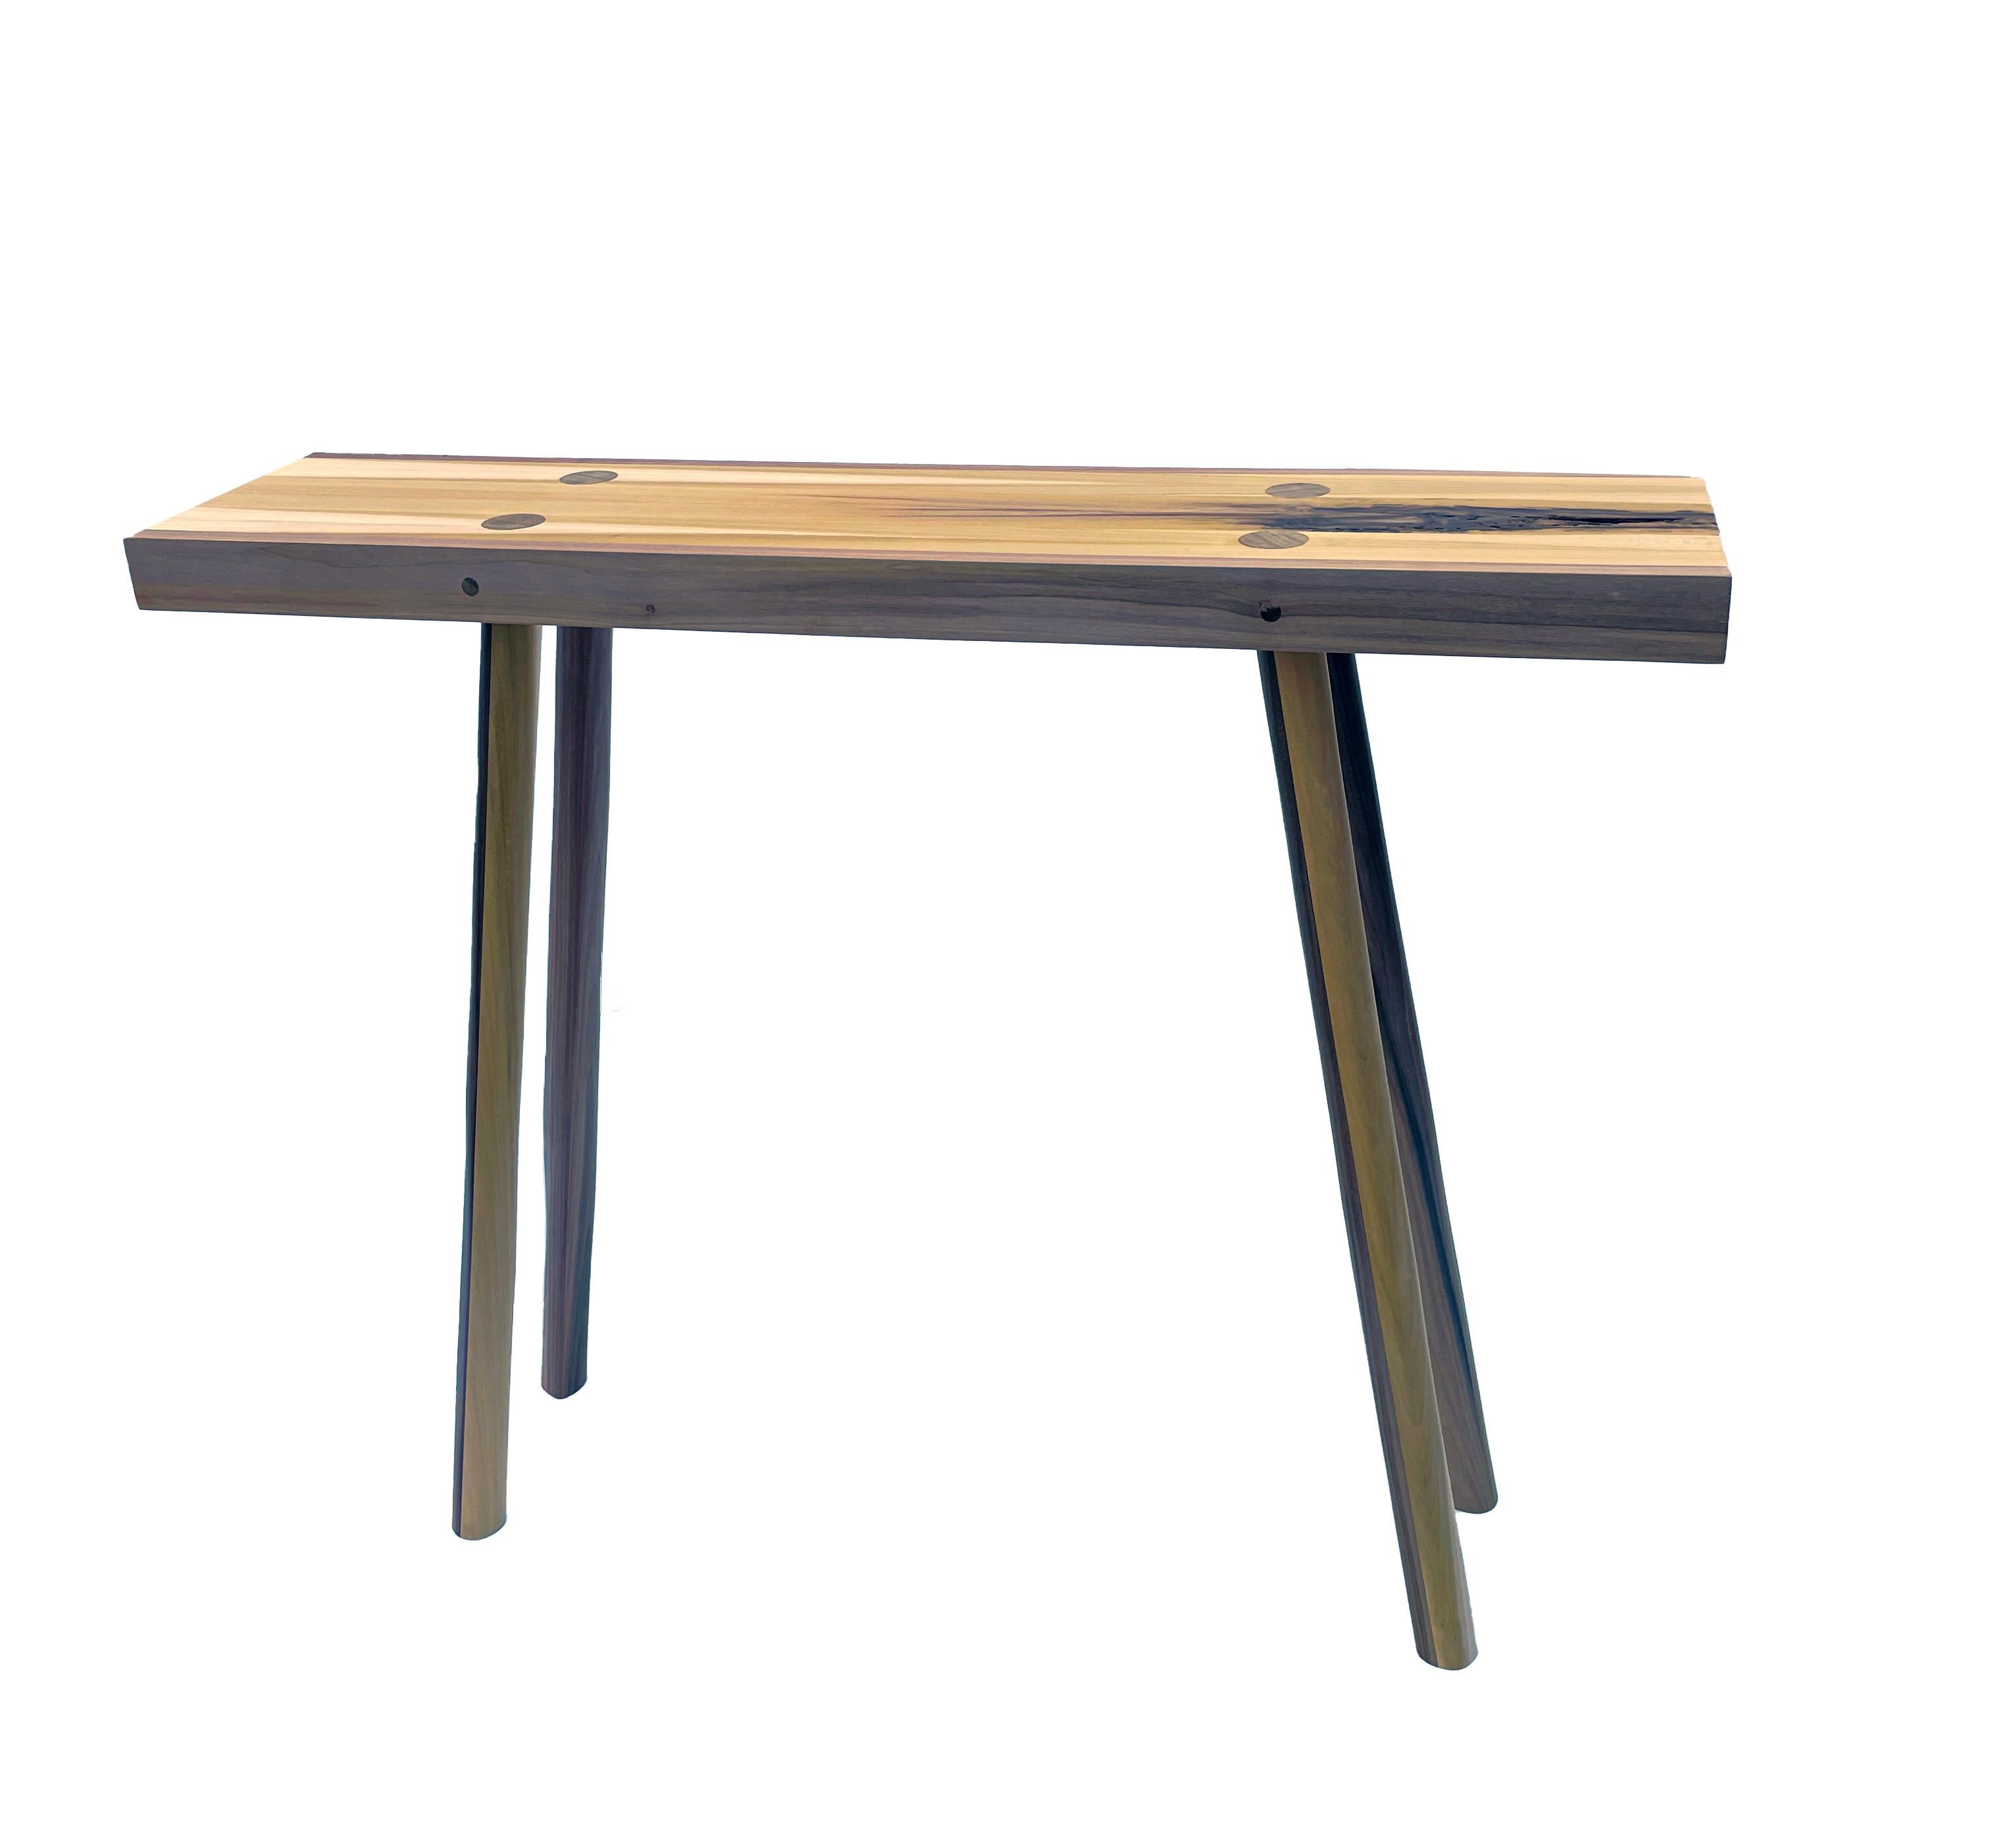 The simplicity of this console table allows for the natural beauty of the wood to come through. Rainbow poplar has subtle shades of green, purple, grey and beige made possible by different minerals in the soils where the tree was grown. These subtle